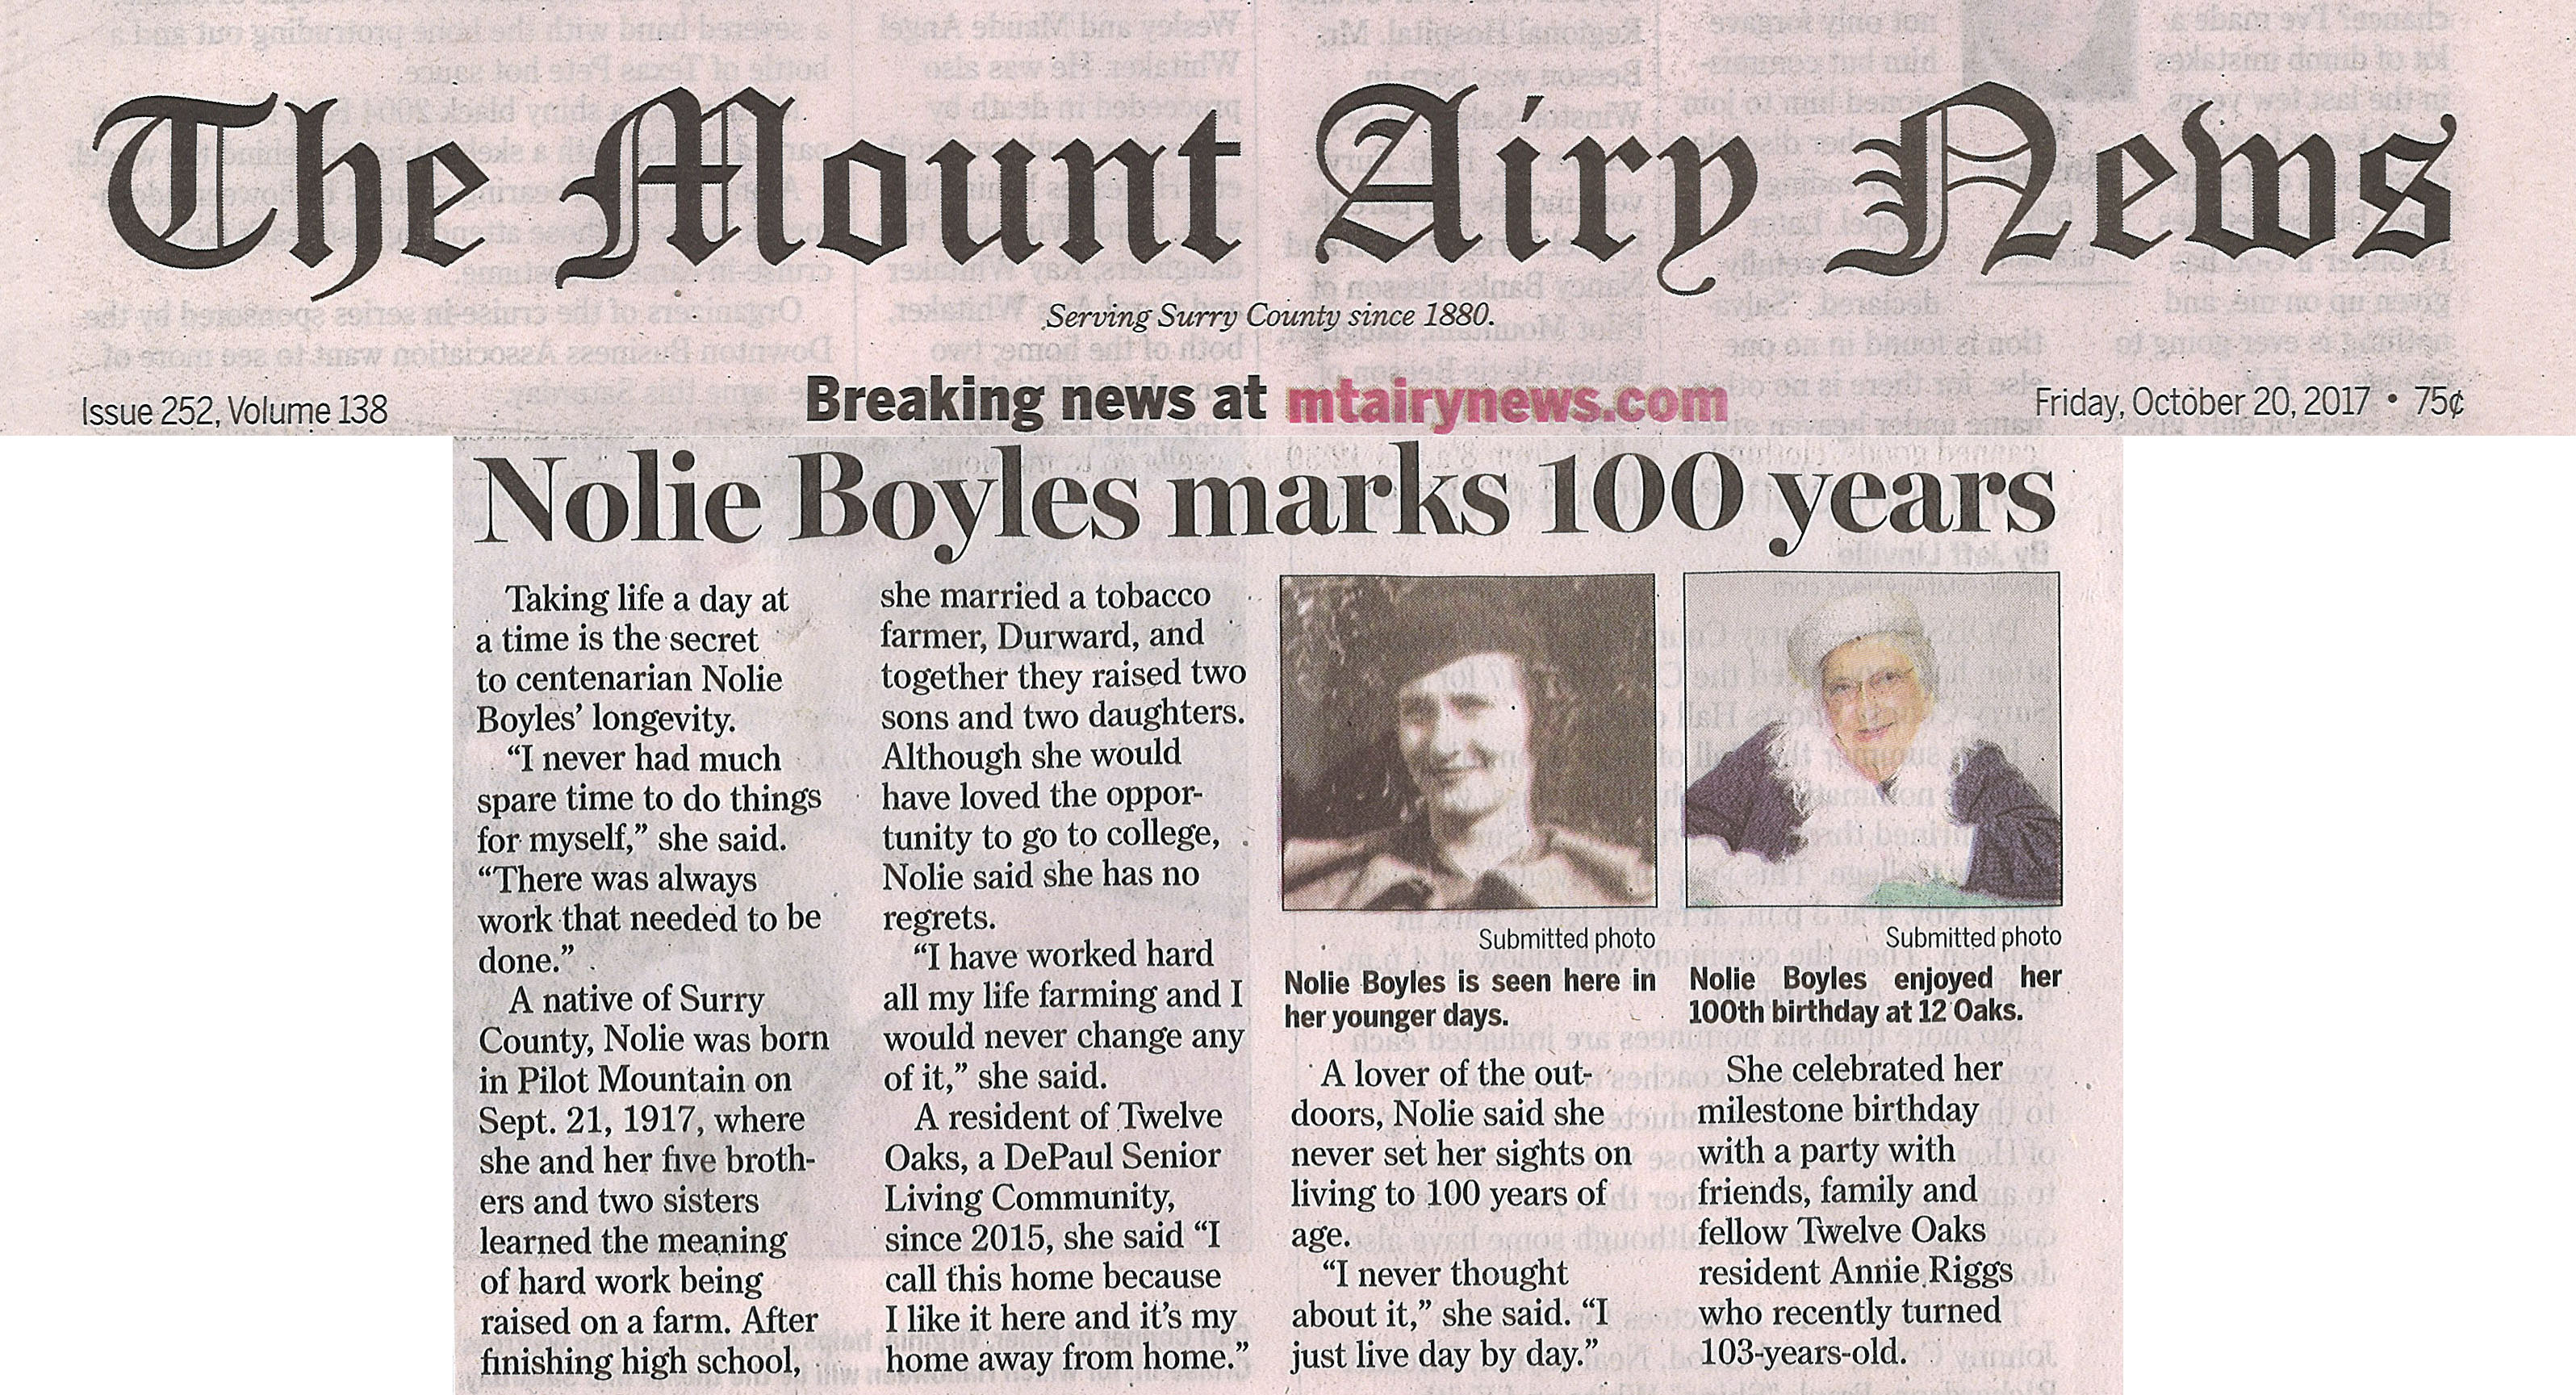 Twelve Oaks resident Nolie Boyles marks 100 years article in the Mount Airy News October 20, 2017